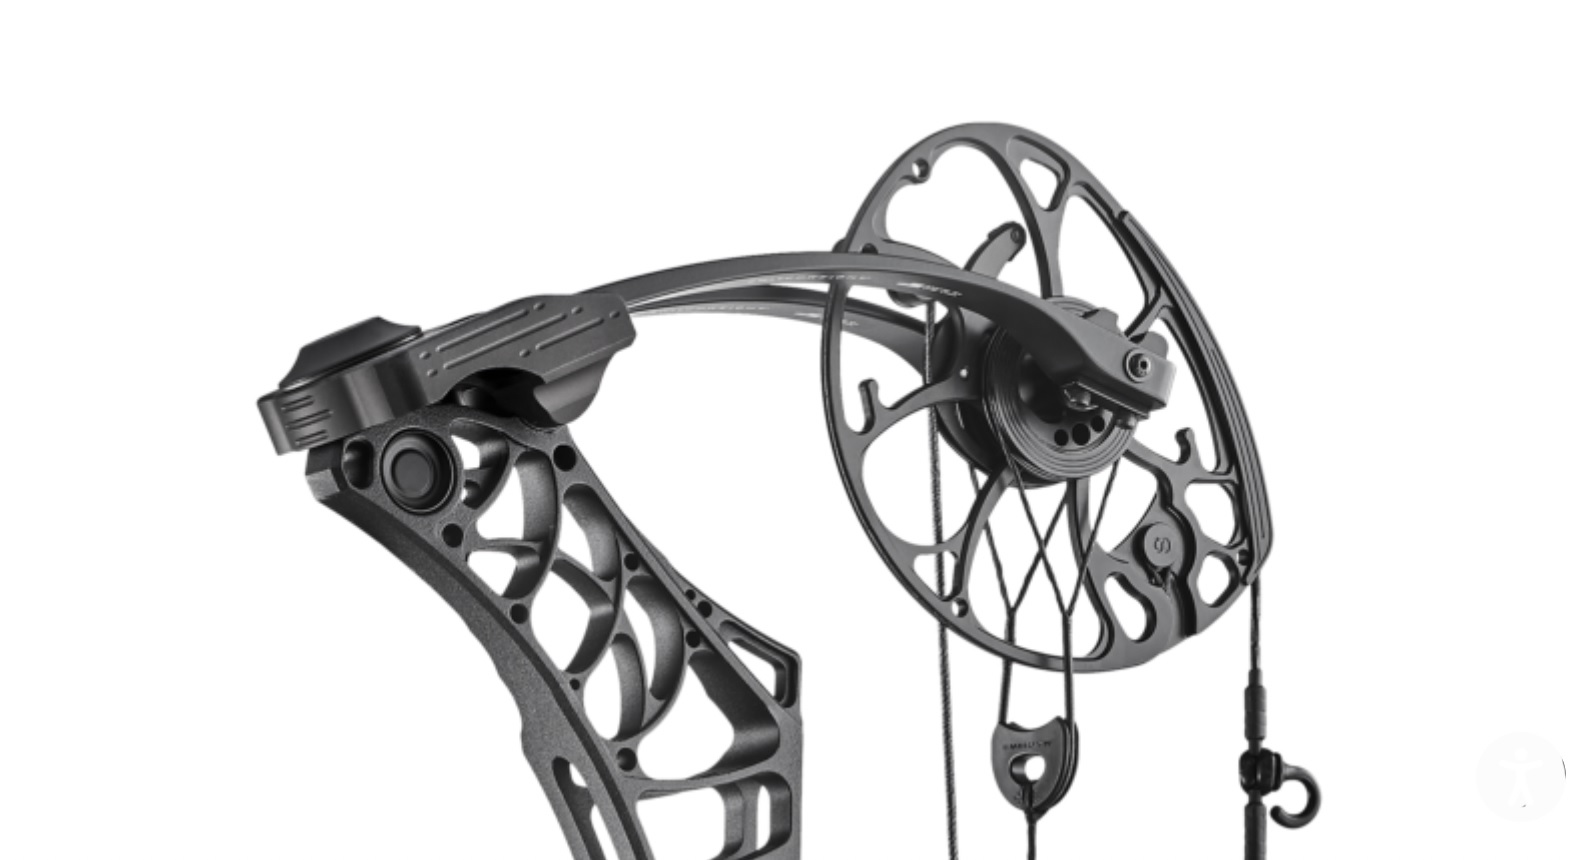 Bowtech’s Binary Overdrive cam system is one of the most efficient on the market today.